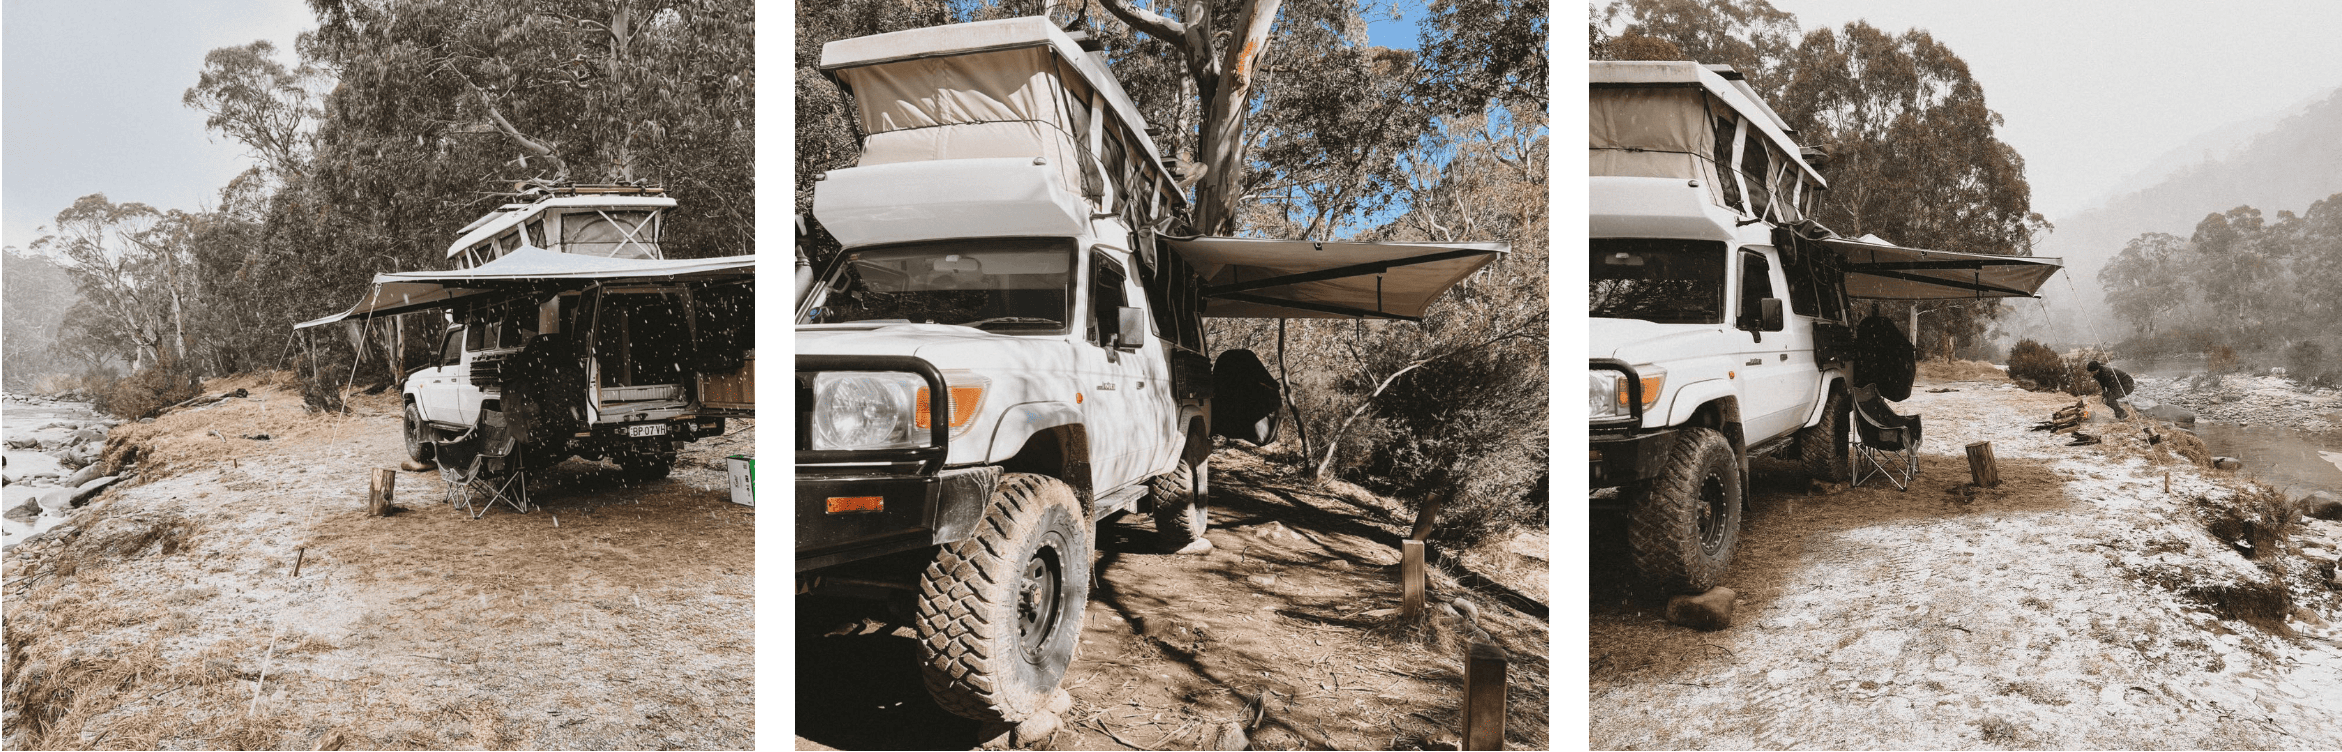 australian made awning Destination4WD Australian made 4x4 free standing awnings and shower awnings